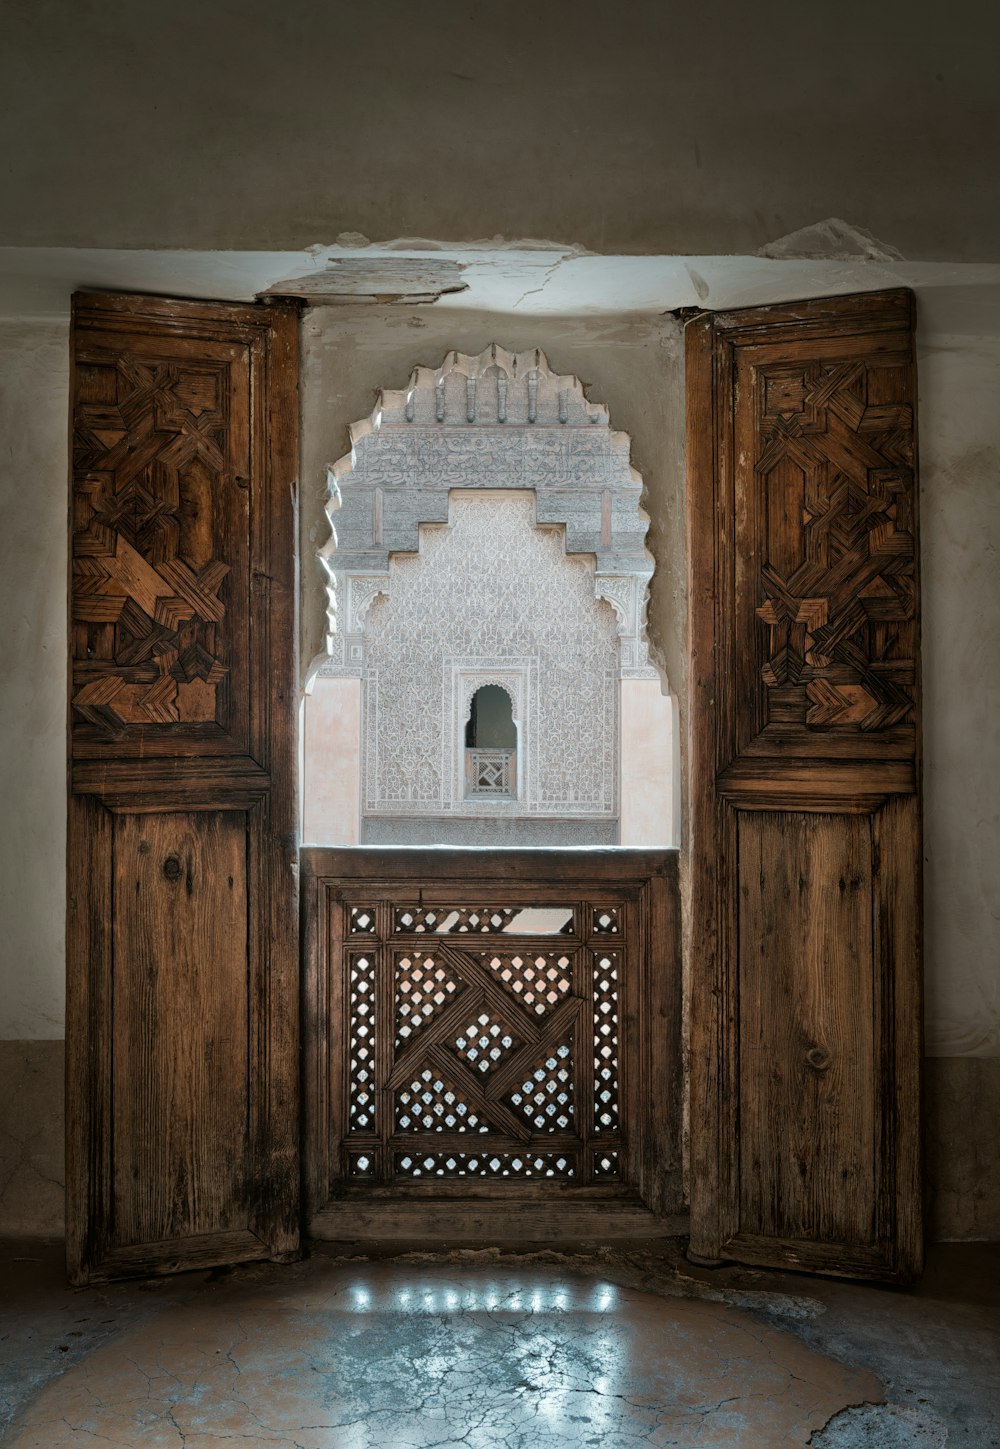 a wooden gate with a window in the middle of it